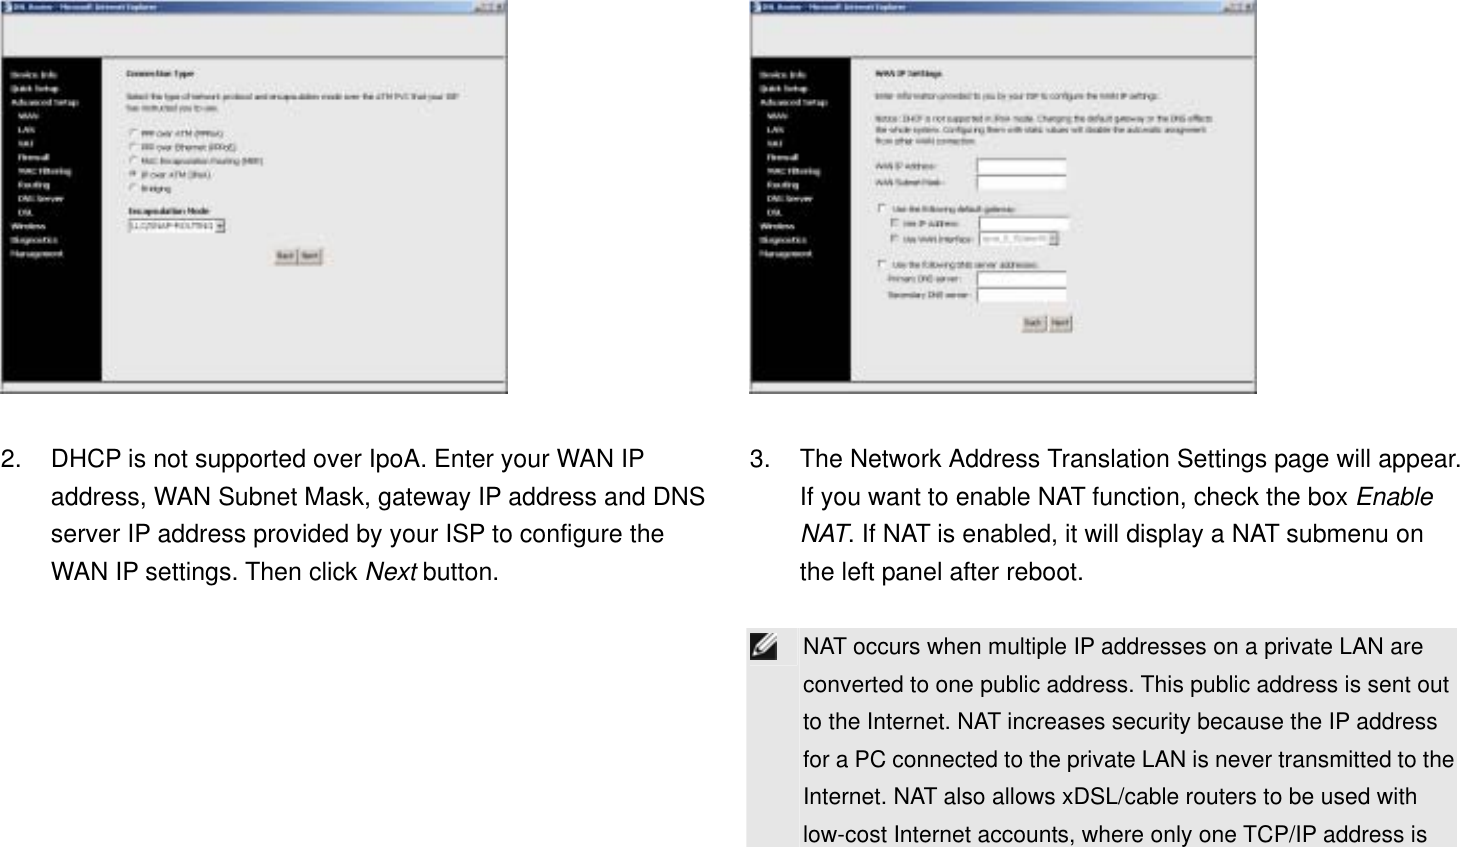   2.  DHCP is not supported over IpoA. Enter your WAN IP address, WAN Subnet Mask, gateway IP address and DNS server IP address provided by your ISP to configure the WAN IP settings. Then click Next button.   3.  The Network Address Translation Settings page will appear. If you want to enable NAT function, check the box Enable NAT. If NAT is enabled, it will display a NAT submenu on the left panel after reboot.   NAT occurs when multiple IP addresses on a private LAN are converted to one public address. This public address is sent out to the Internet. NAT increases security because the IP address for a PC connected to the private LAN is never transmitted to the Internet. NAT also allows xDSL/cable routers to be used with low-cost Internet accounts, where only one TCP/IP address is 